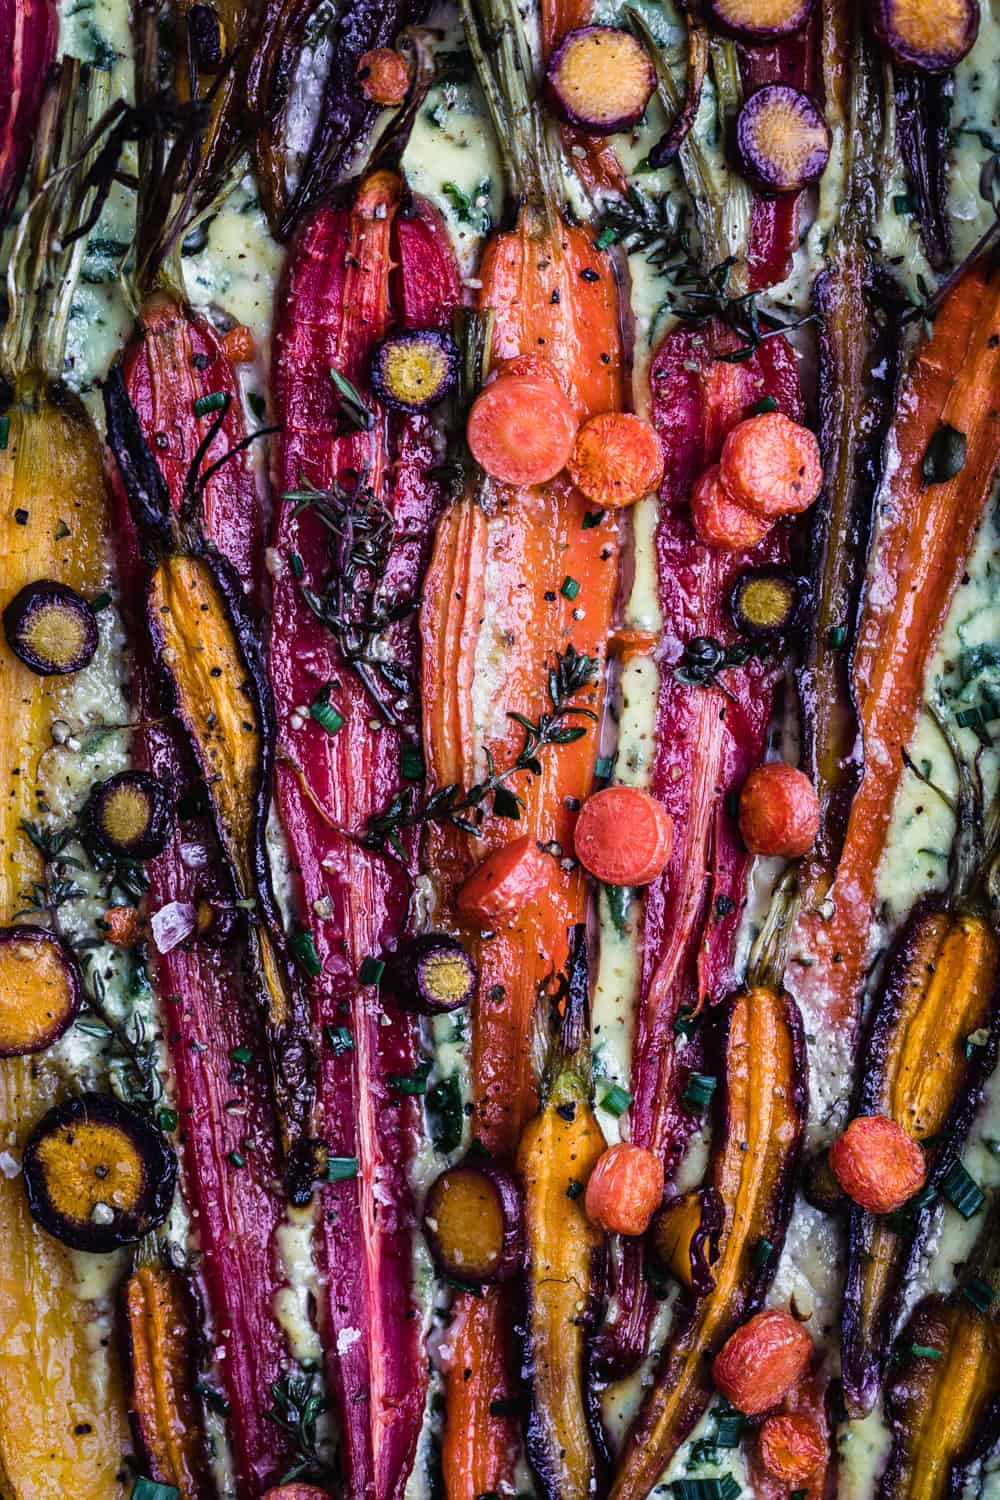 The roasted carrot tart, up close shot of the filling.